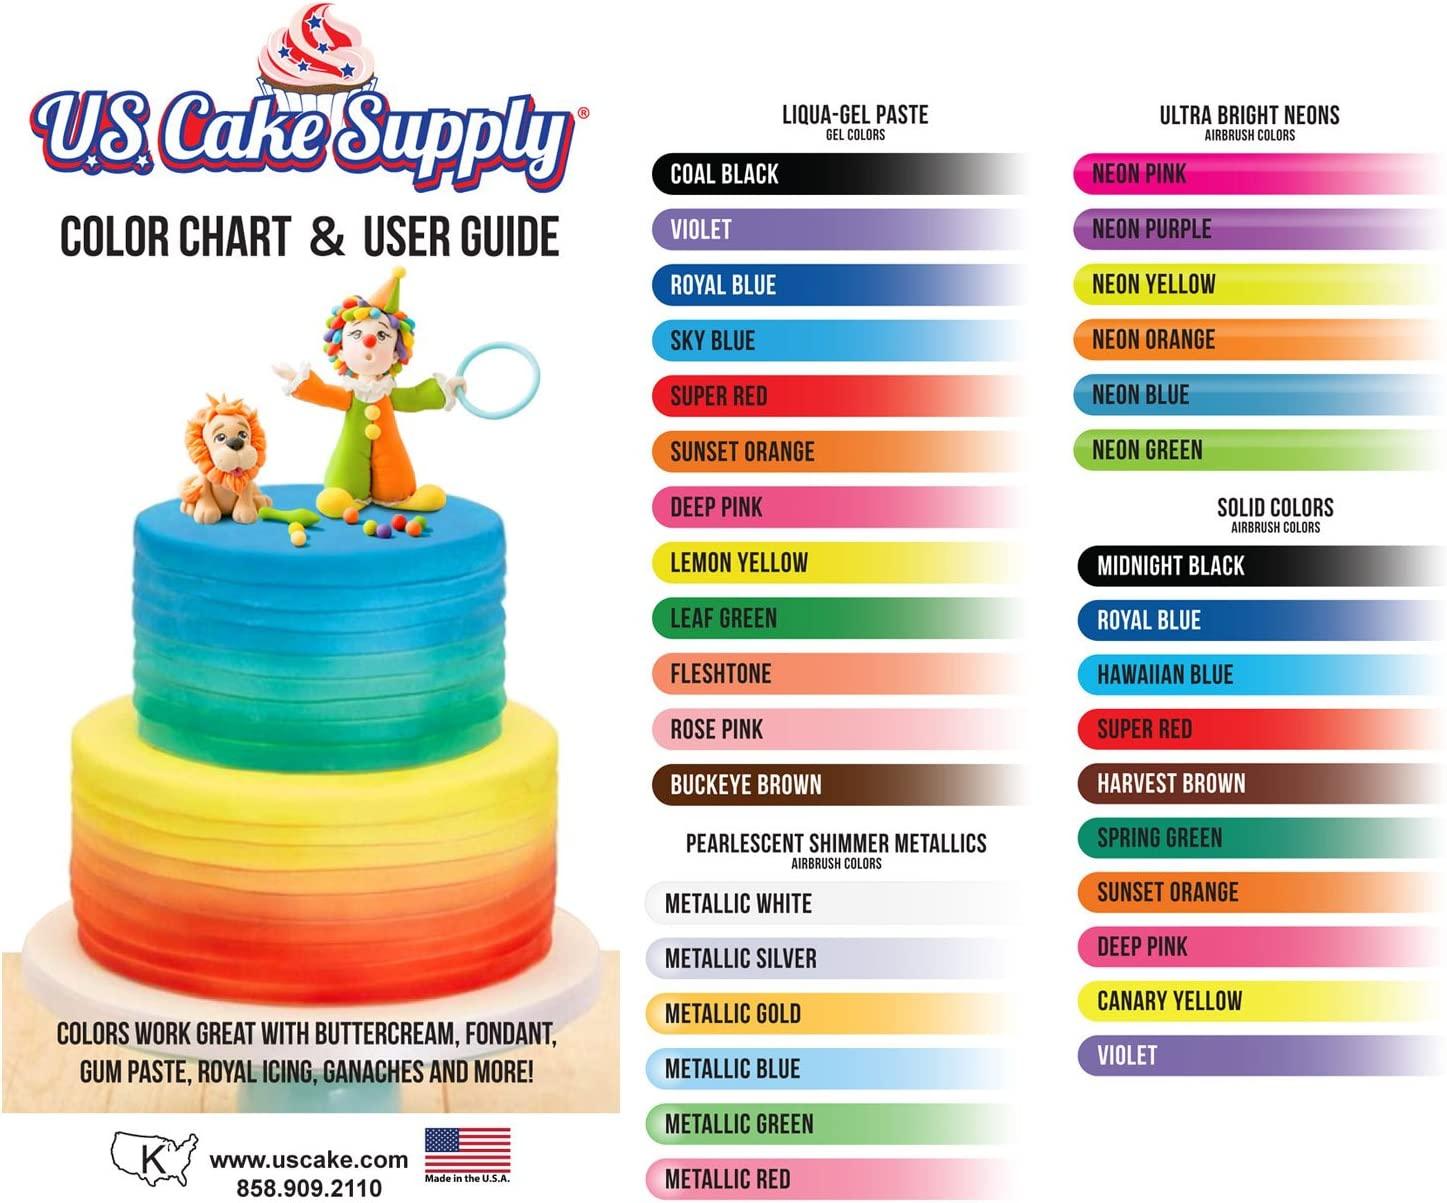 U.S. Cake Supply - Complete Cake Decorating Airbrush Kit with A Full Selection of 24 Vivid Airbrush Food Colors - Decorate Cakes, Cupcakes, Cookies